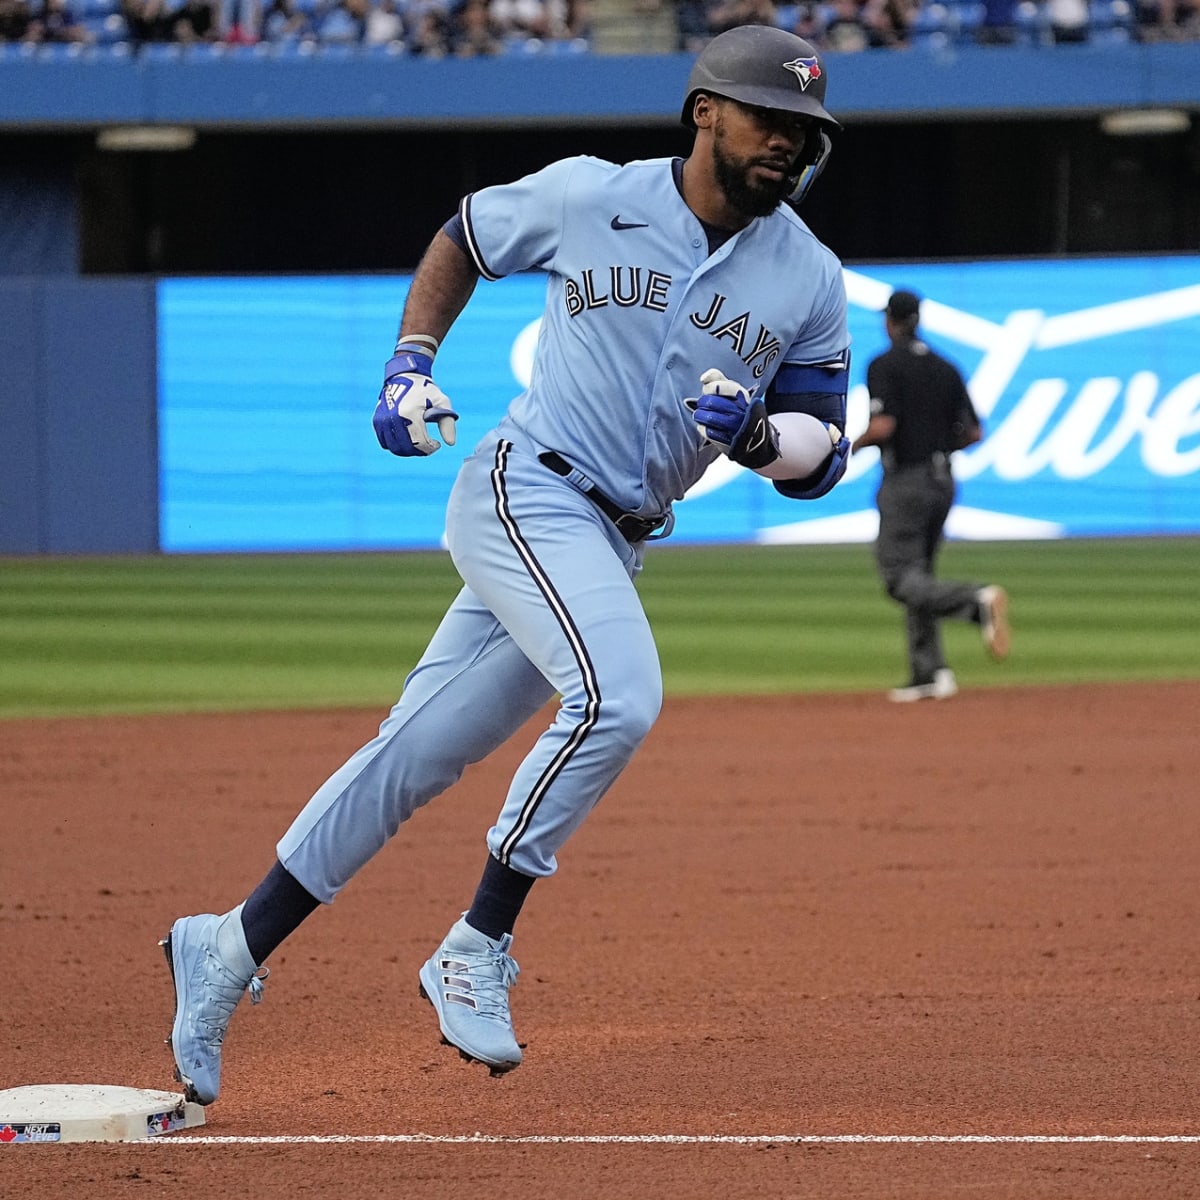 Blue Jays play the Guardians leading series 2-1